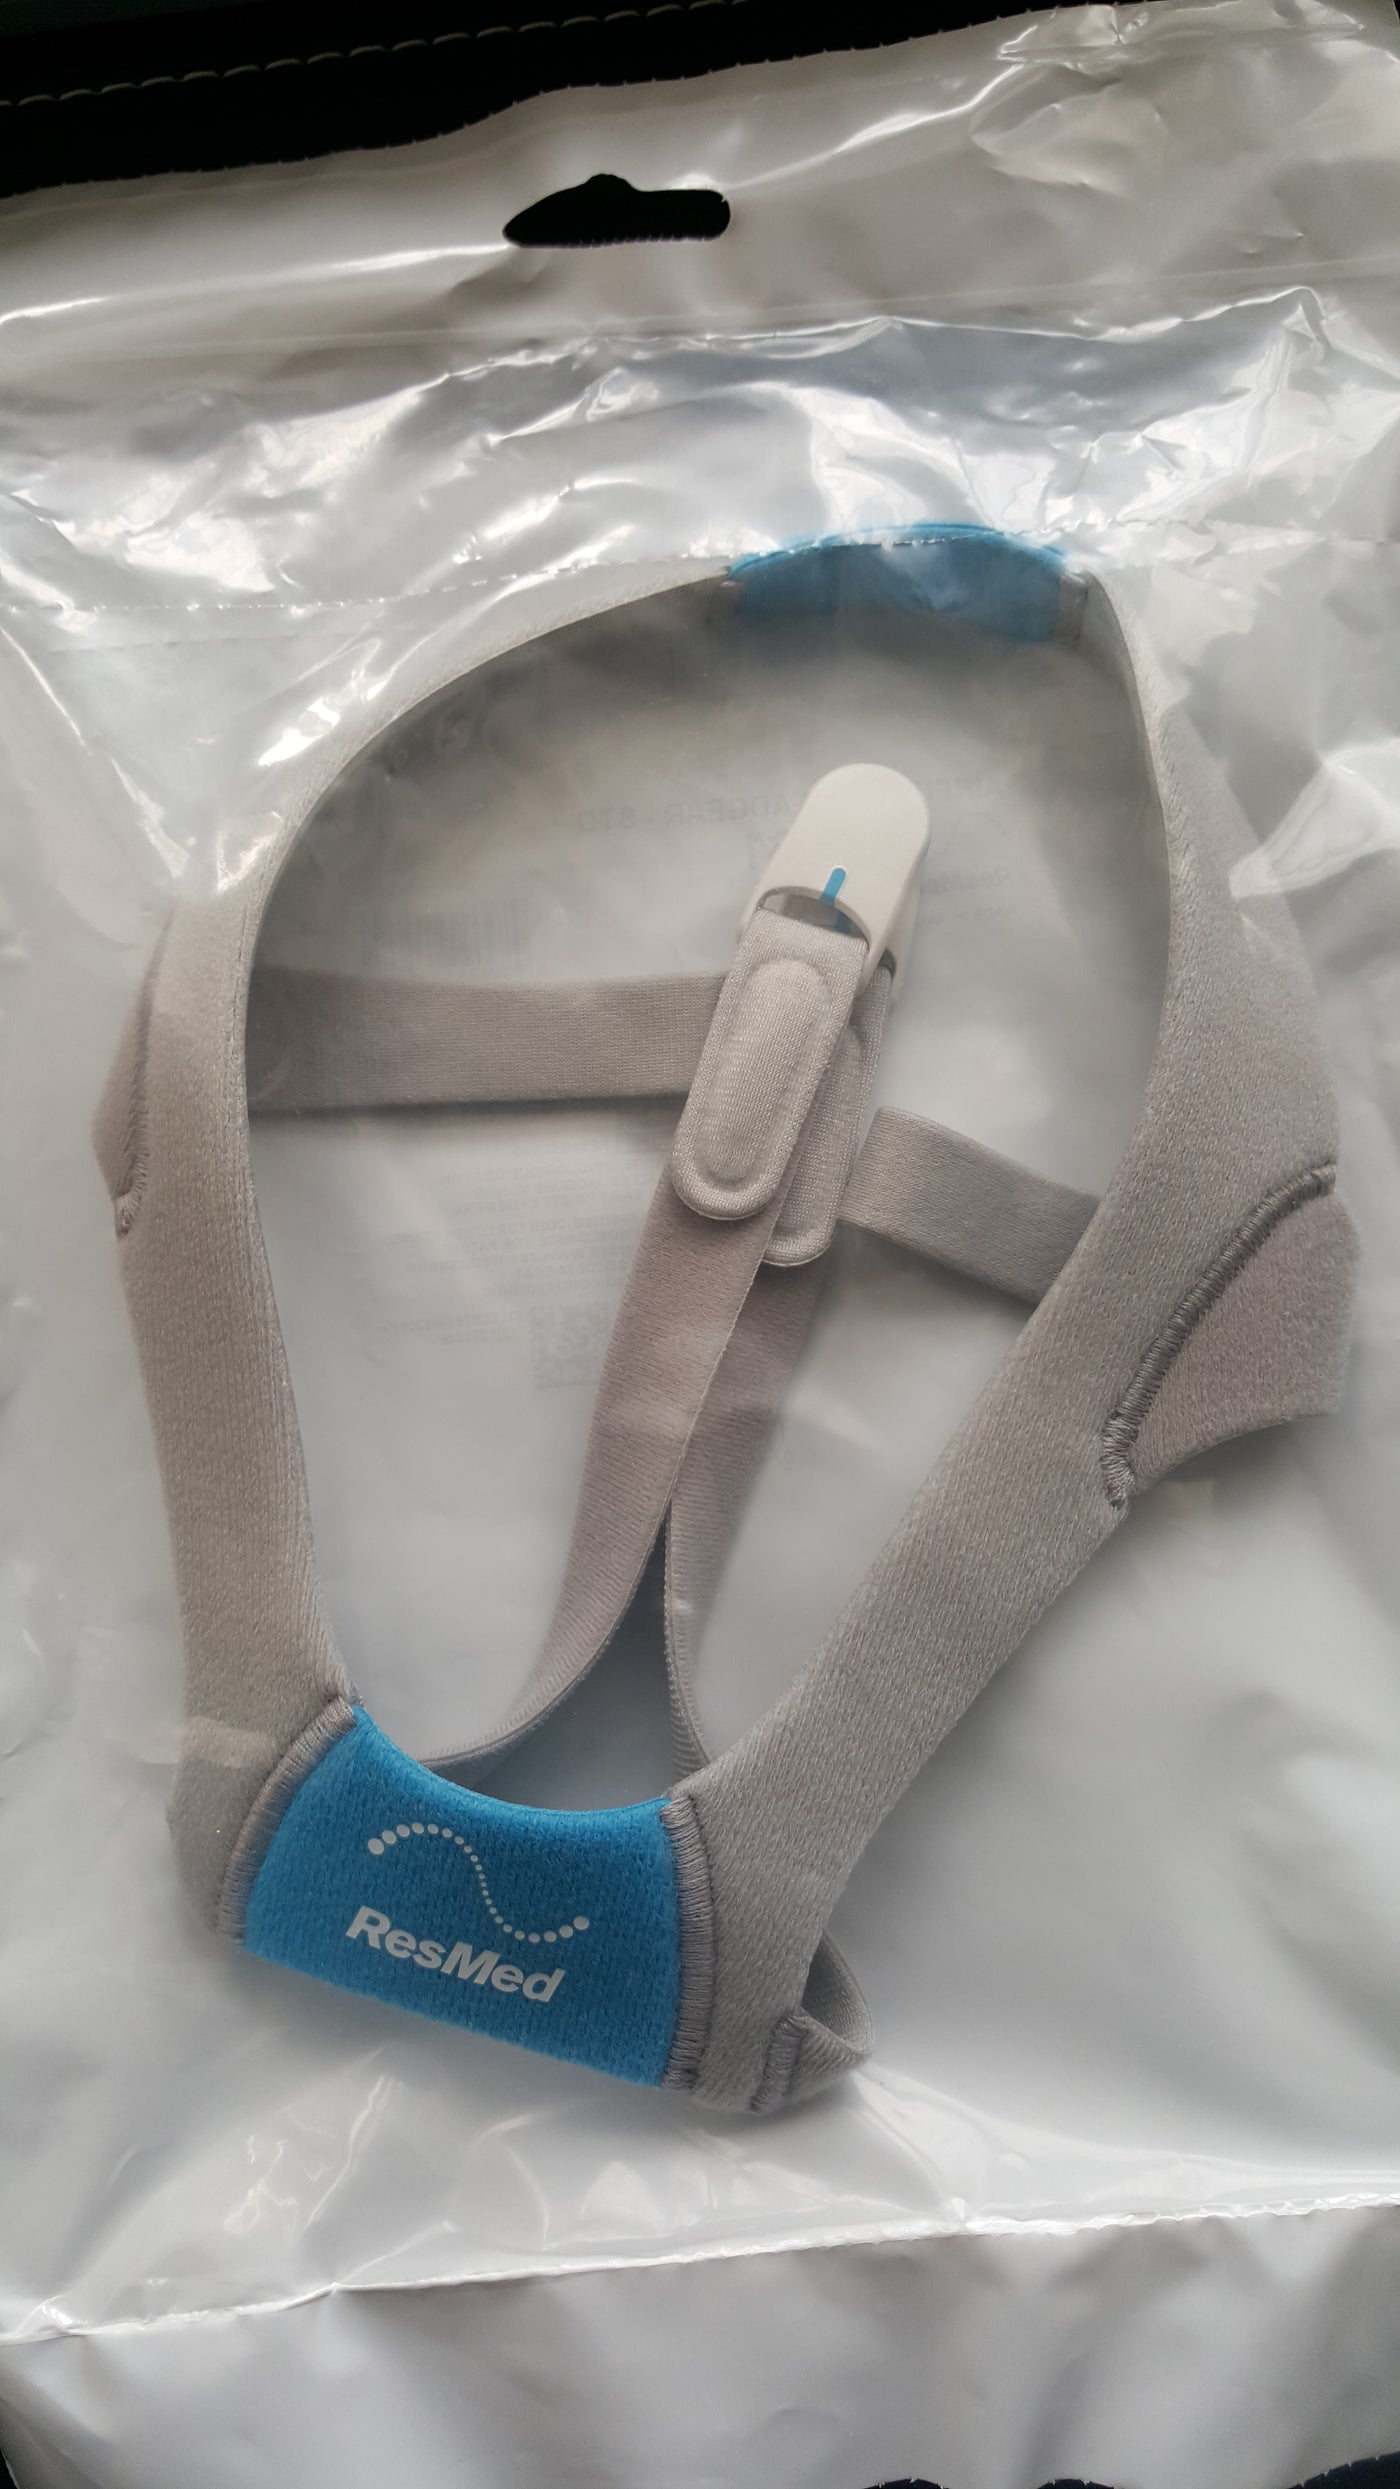 Headgear / Strap for Him / Her Resmed AirFit / AirTouch N20 CPAP mask